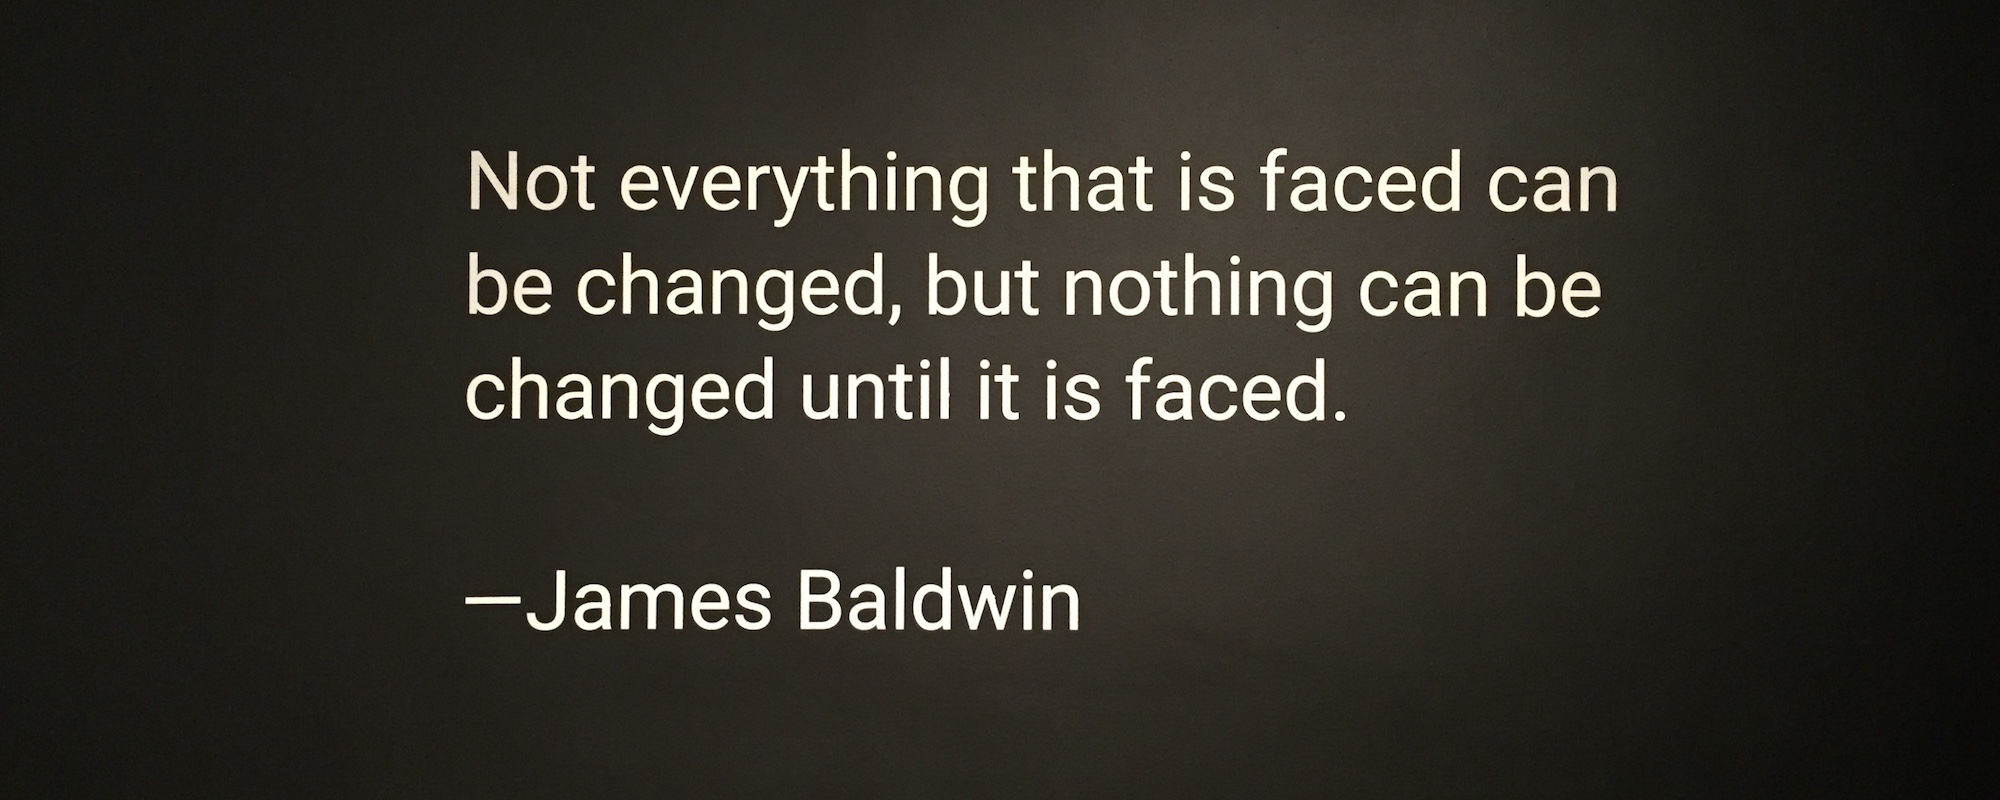 Not everything that is faced can be changed, but nothing can be changed until it is faced.